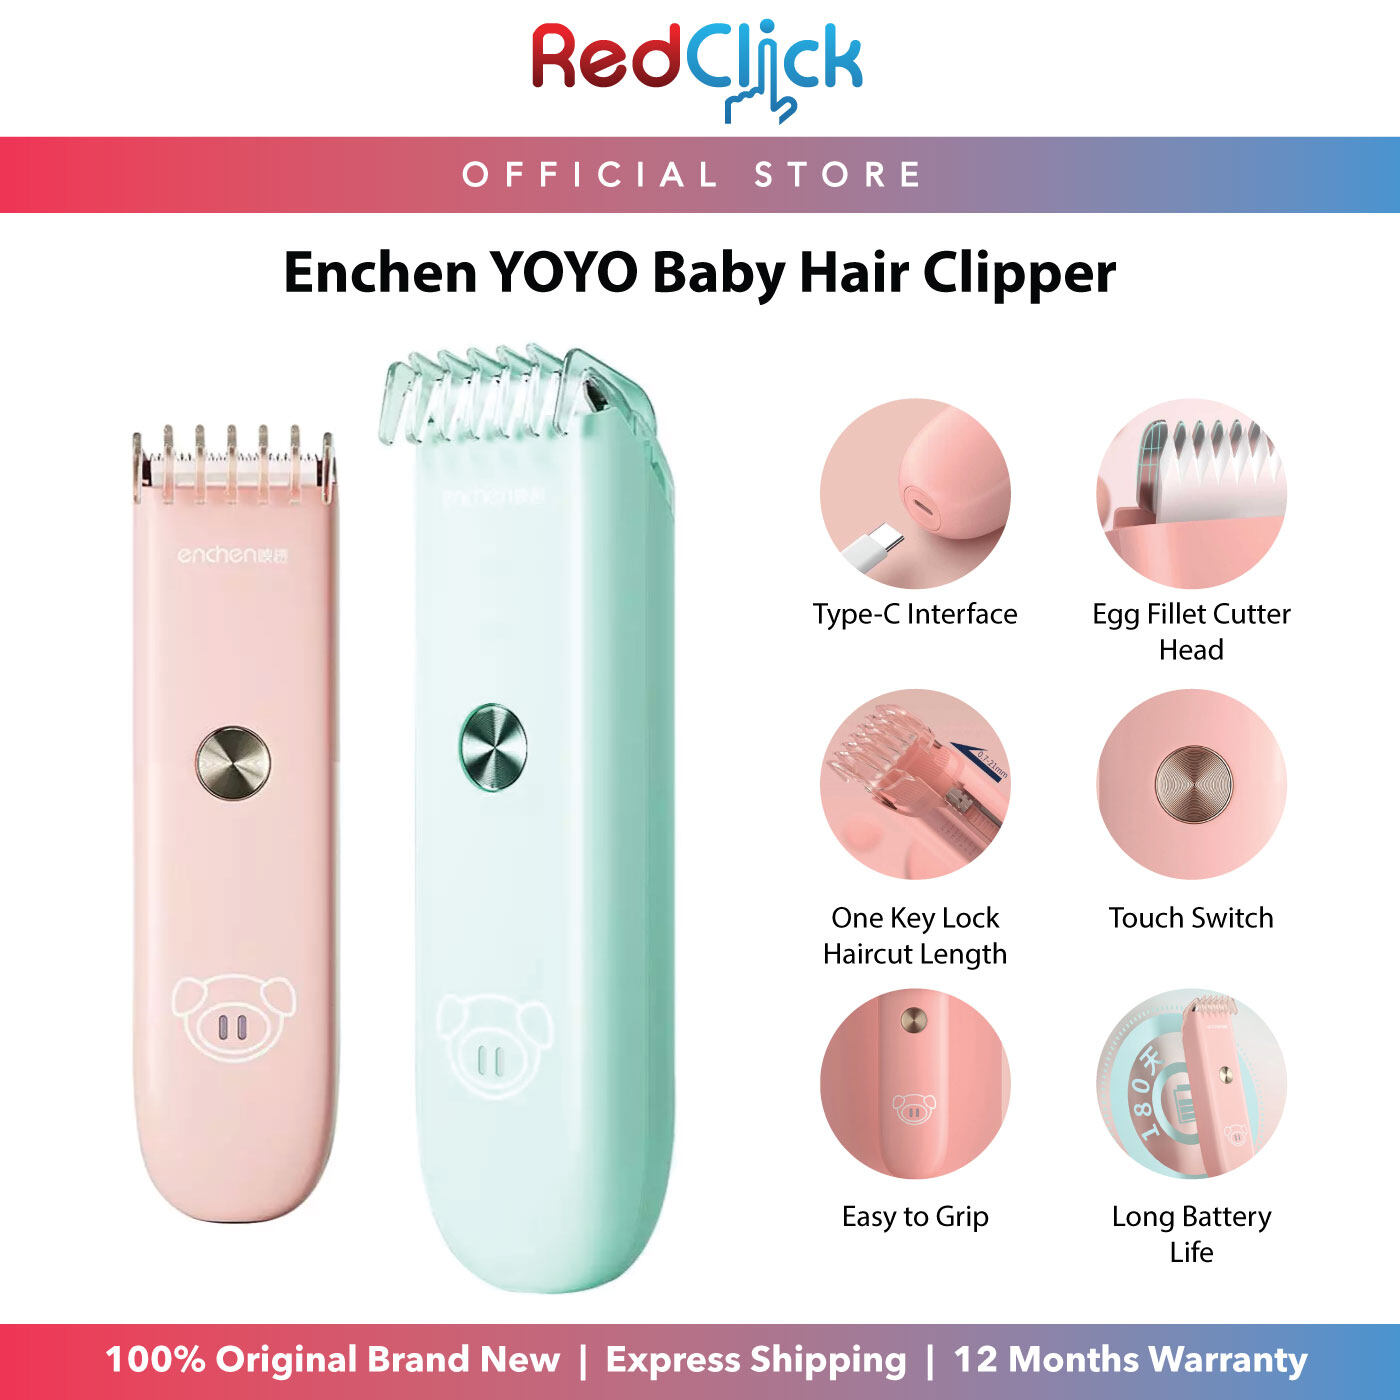 Enchen YOYO Baby Hair Clipper Adjustable Haircut Length Egg Fillet Cutter Head Protect Baby Skin